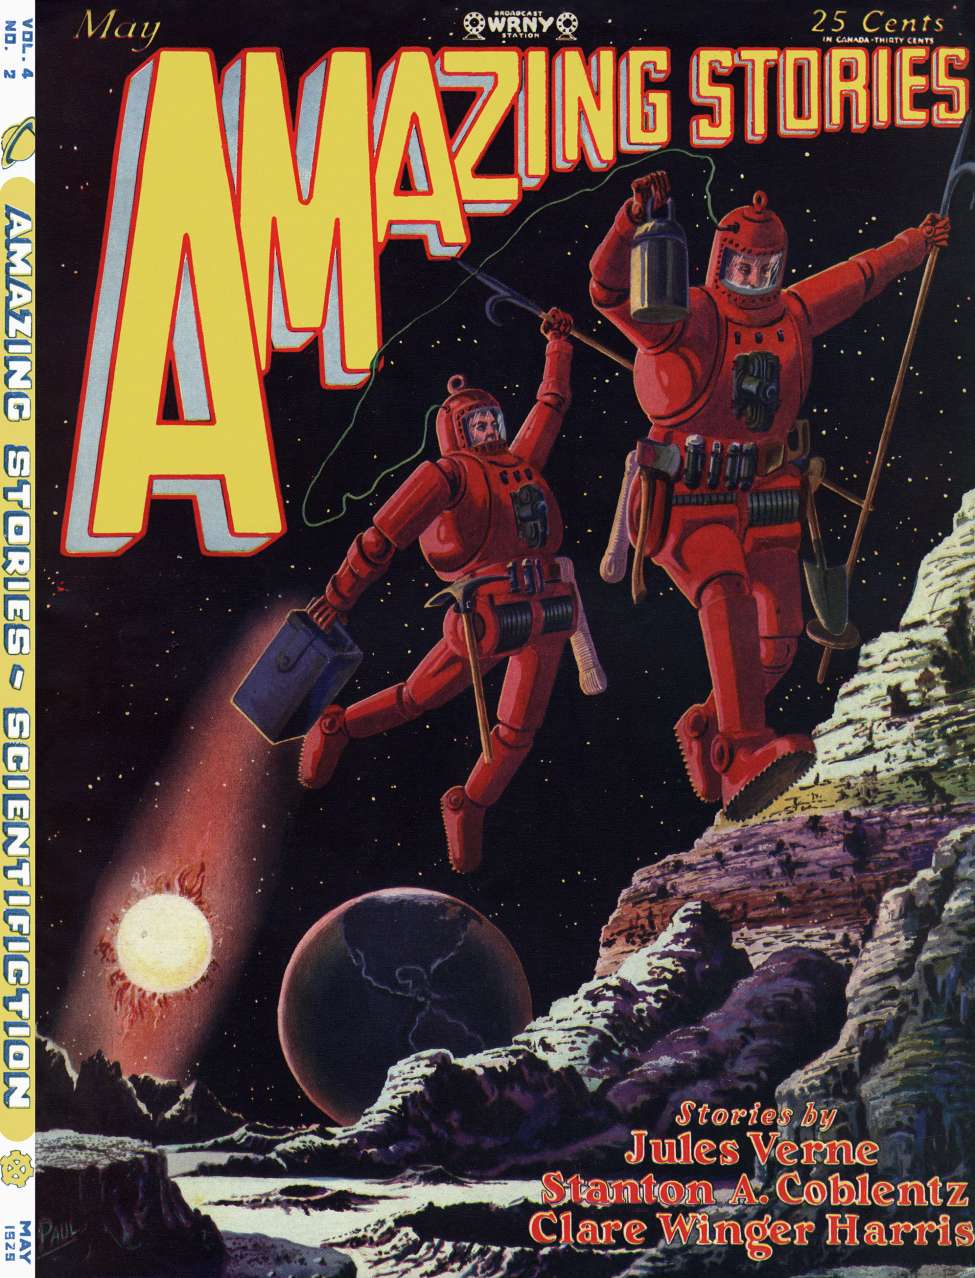 Book Cover For Amazing Stories v4 2 - The English at the North Pole - Frank R. Paul